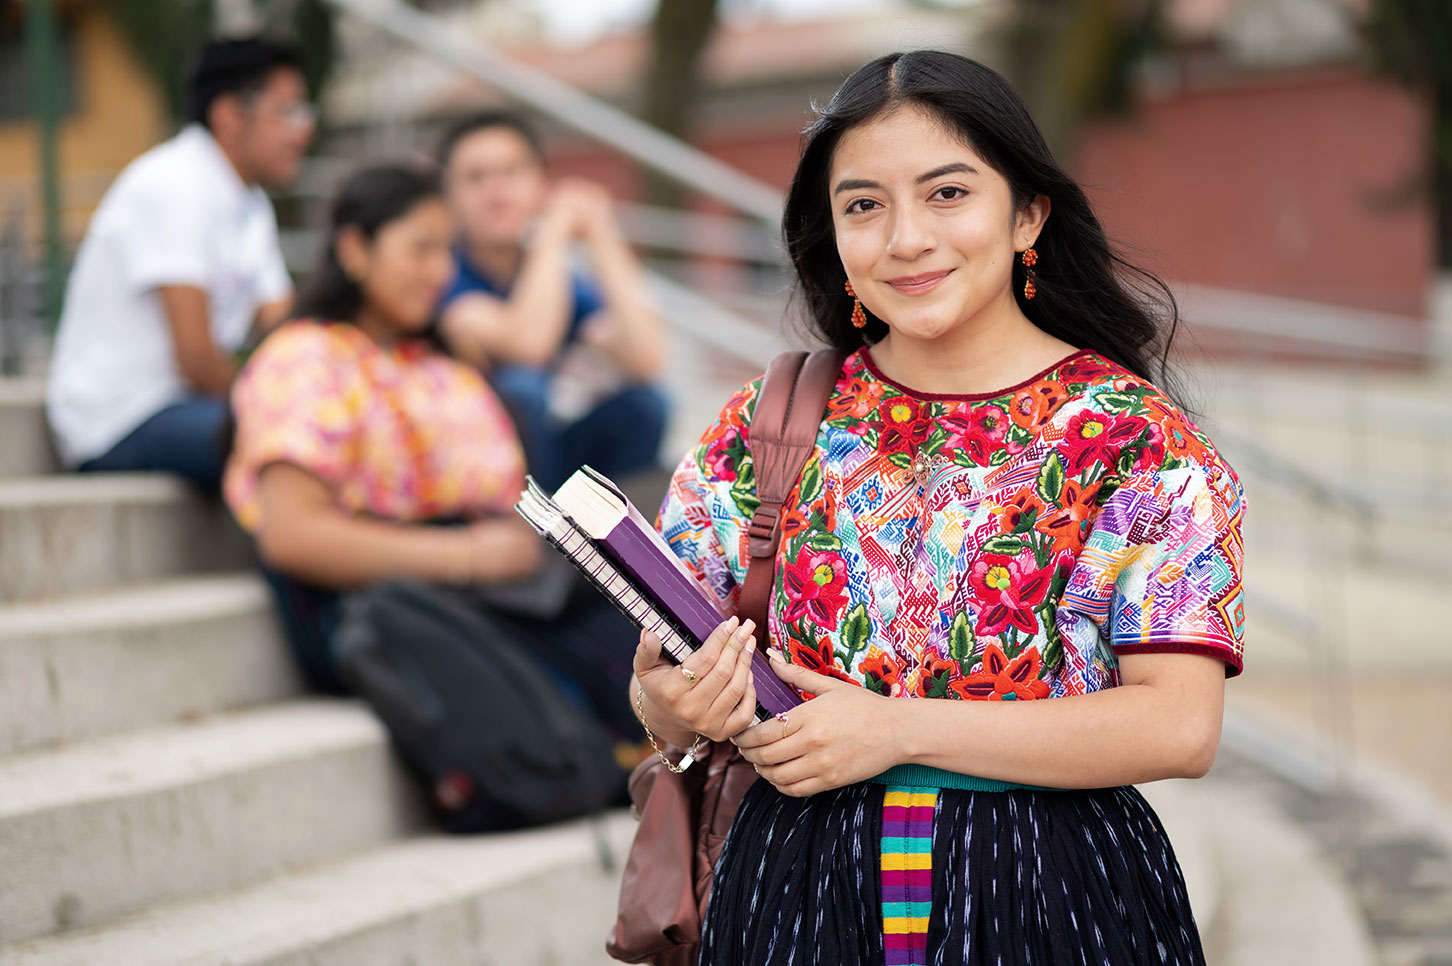 Student with books. Image courtesy of Adobe Stock